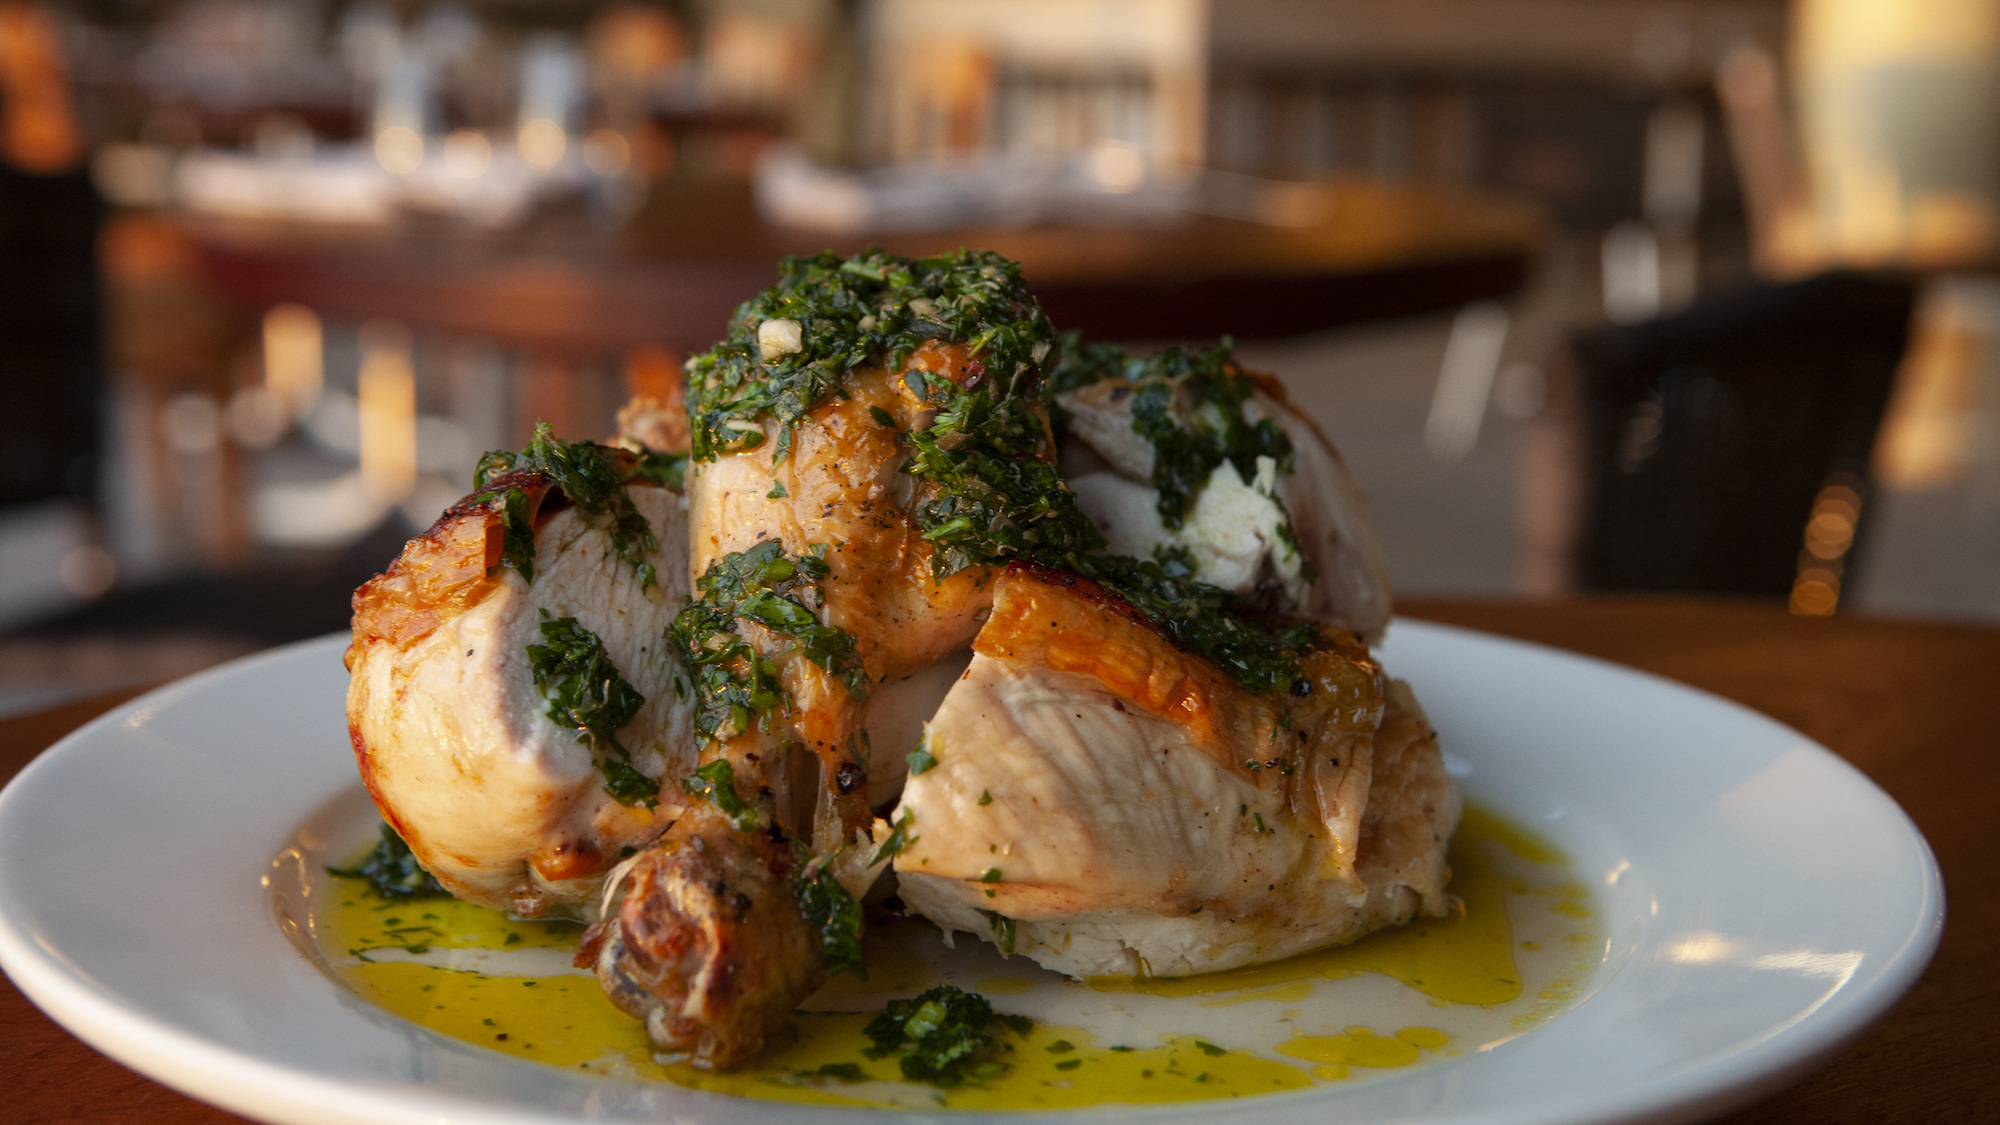 Barbuto's roast chicken. Food and interior photos by Jen Davidson, courtesy of Barbuto